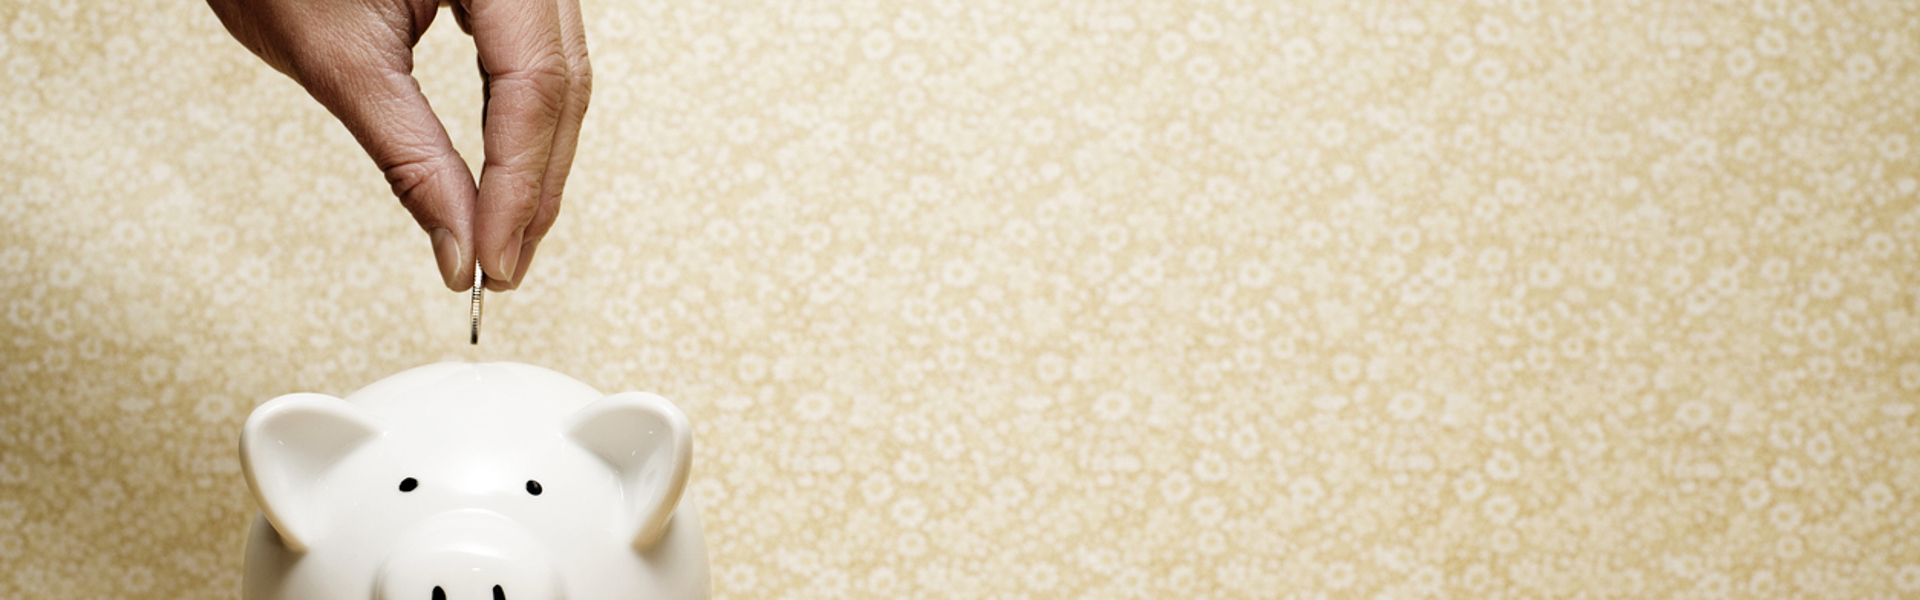 a hand placing a penny into a white piggy bank against a yellow floral wallpaper background